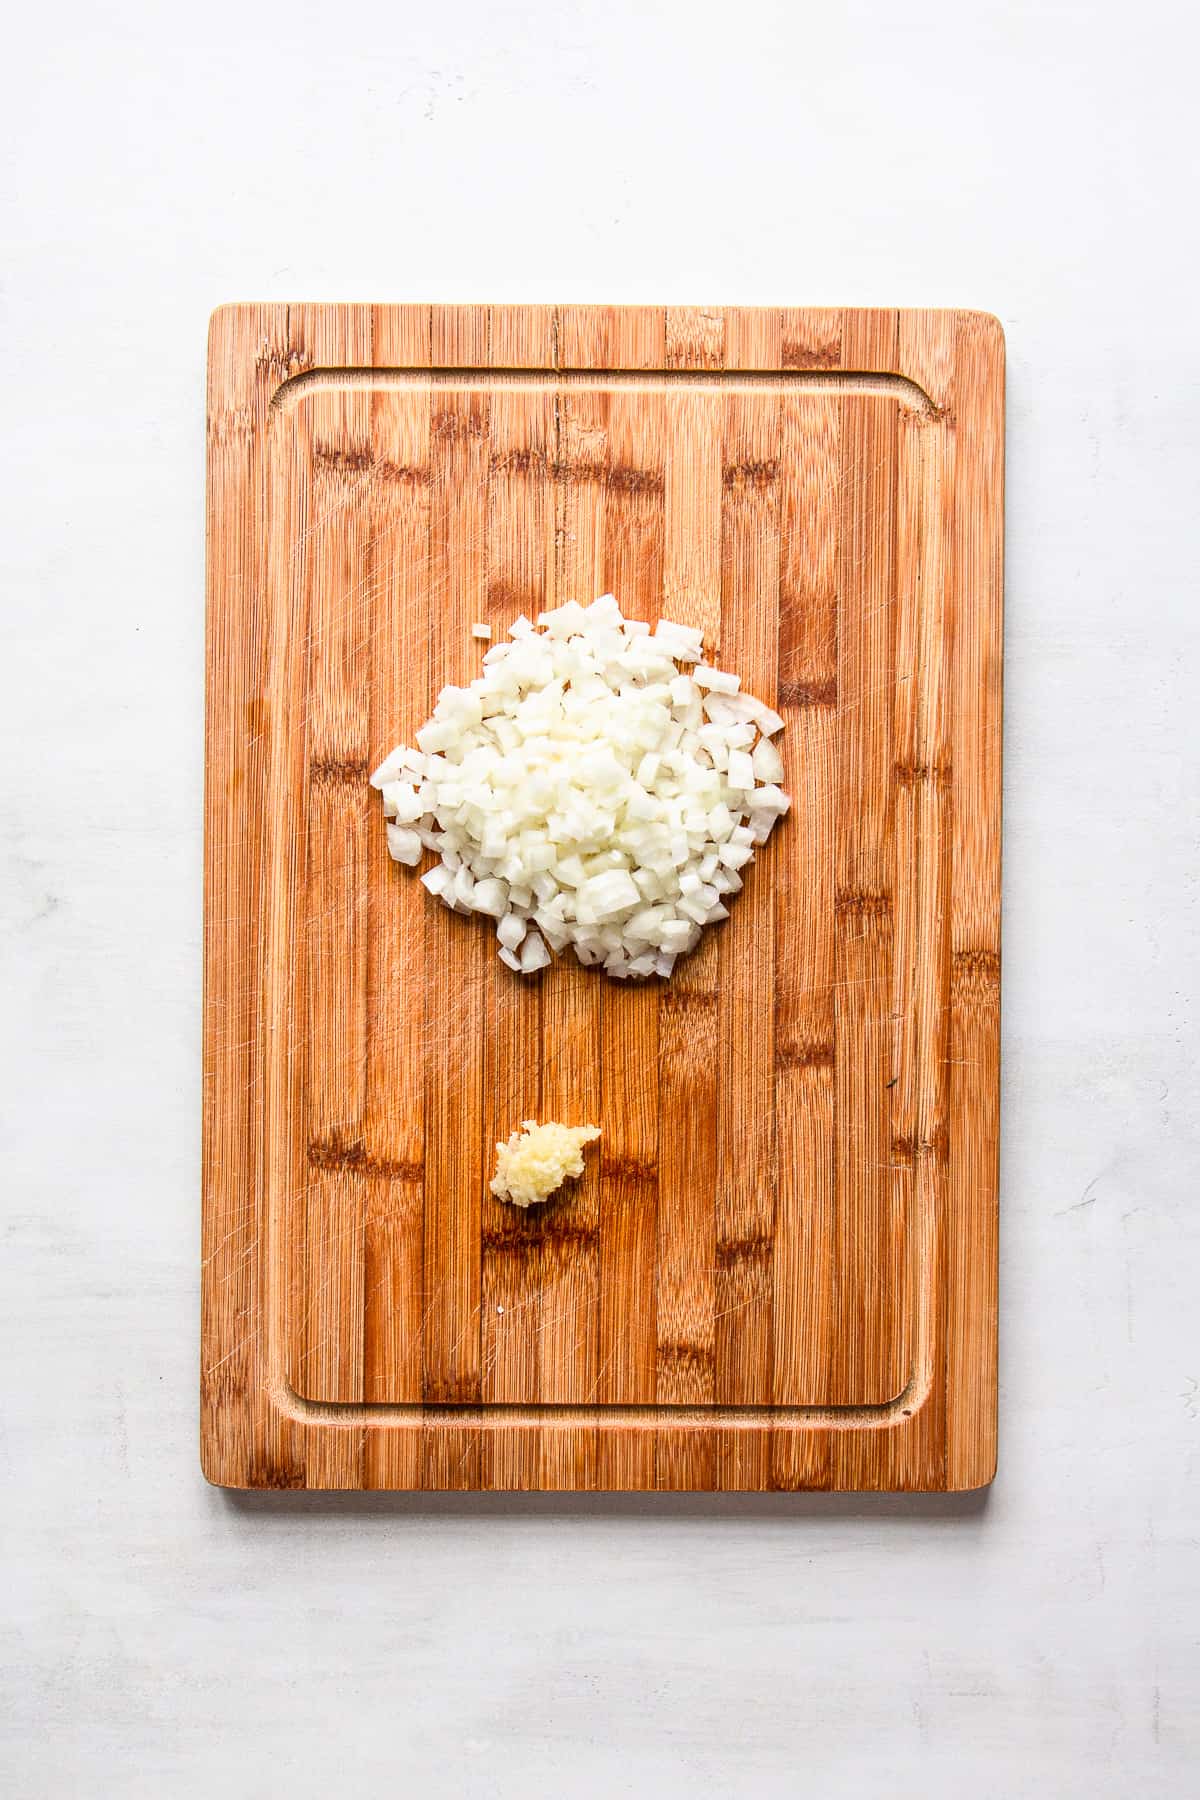 Minced onion and crushed garlic on a wooden cutting board.